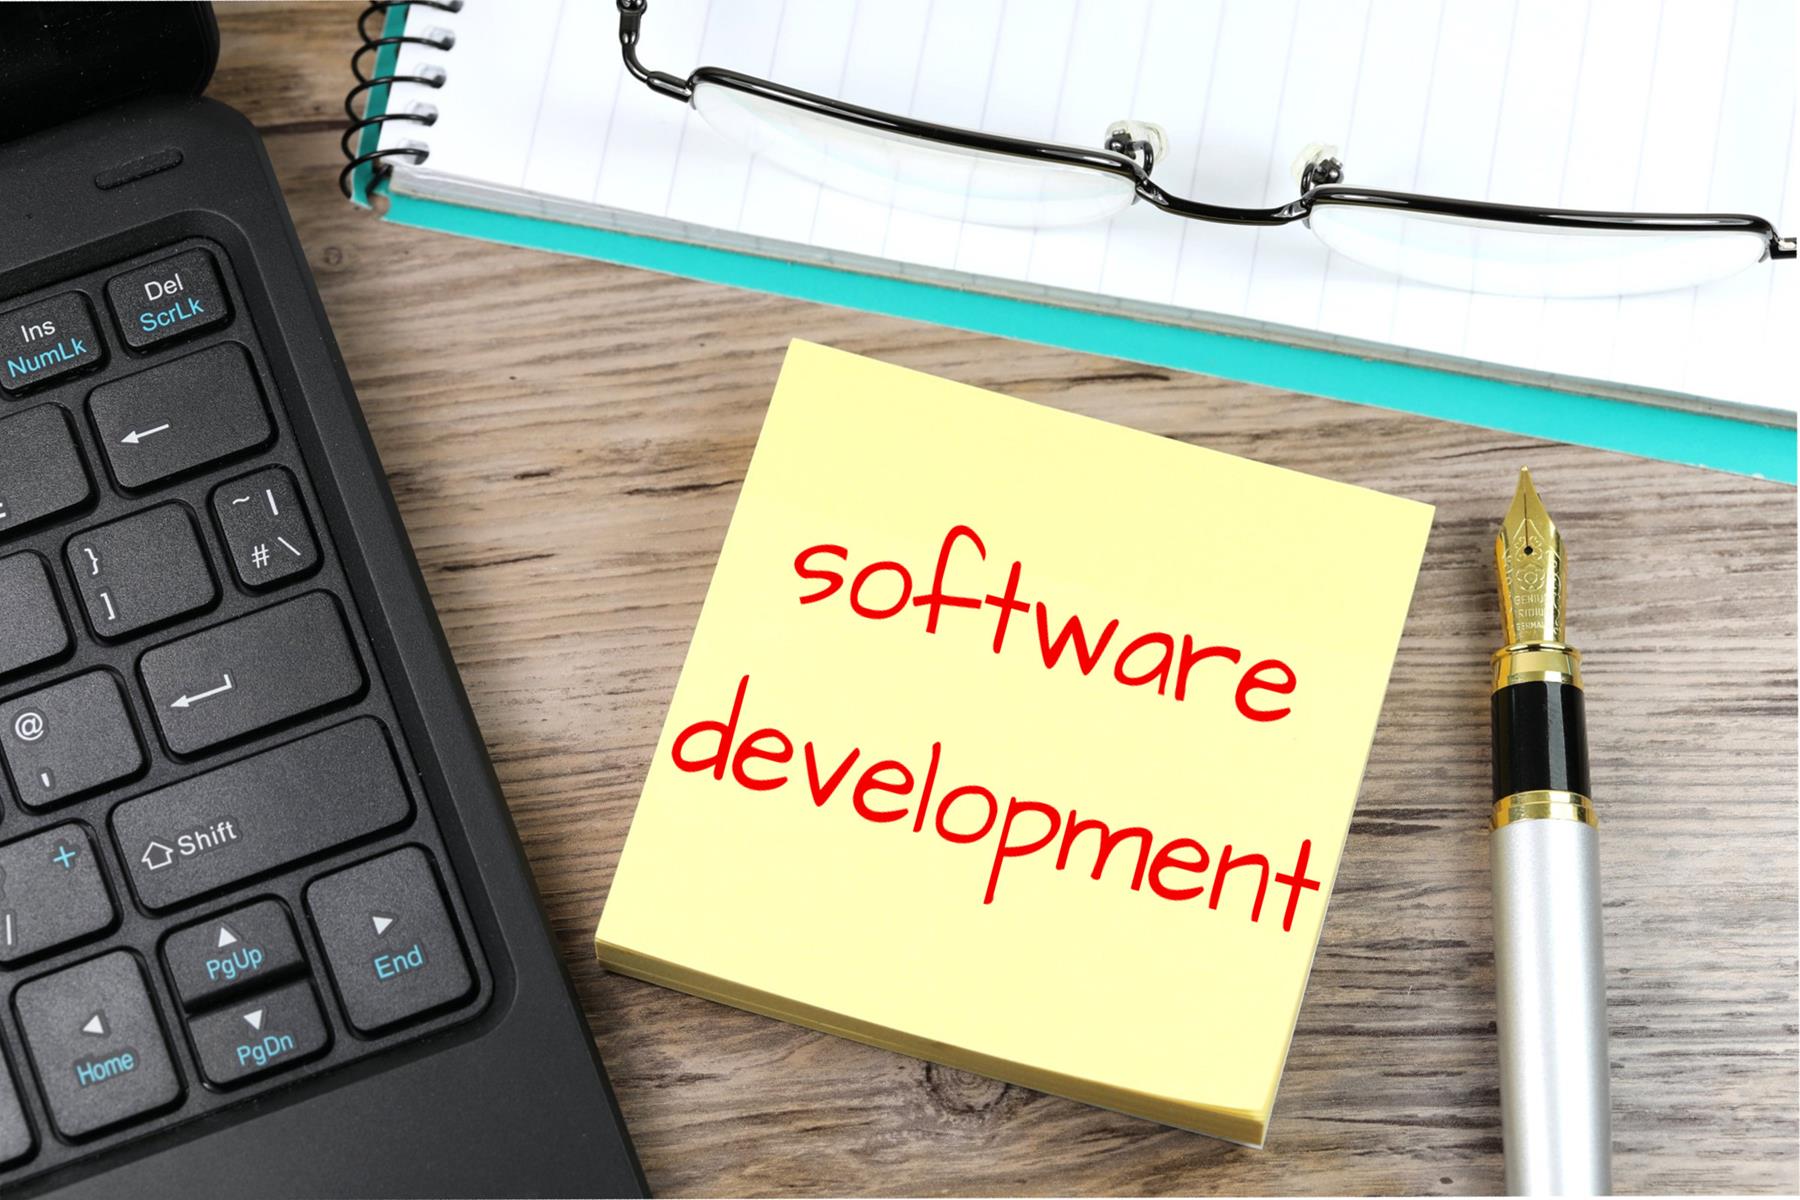 software-development-free-of-charge-creative-commons-post-it-note-image